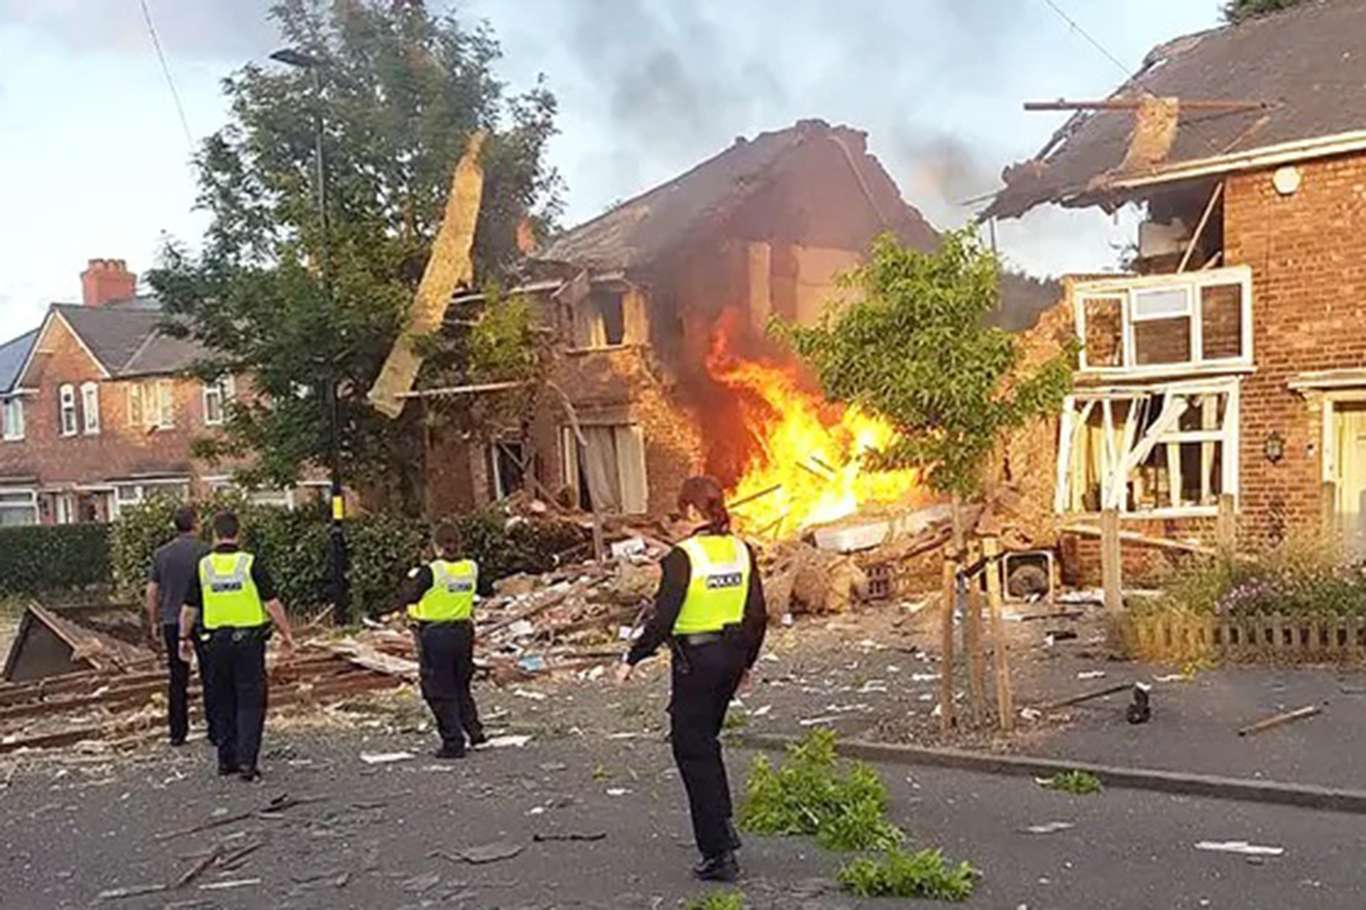 UK: Casualties reported after house explosion in Birmingham